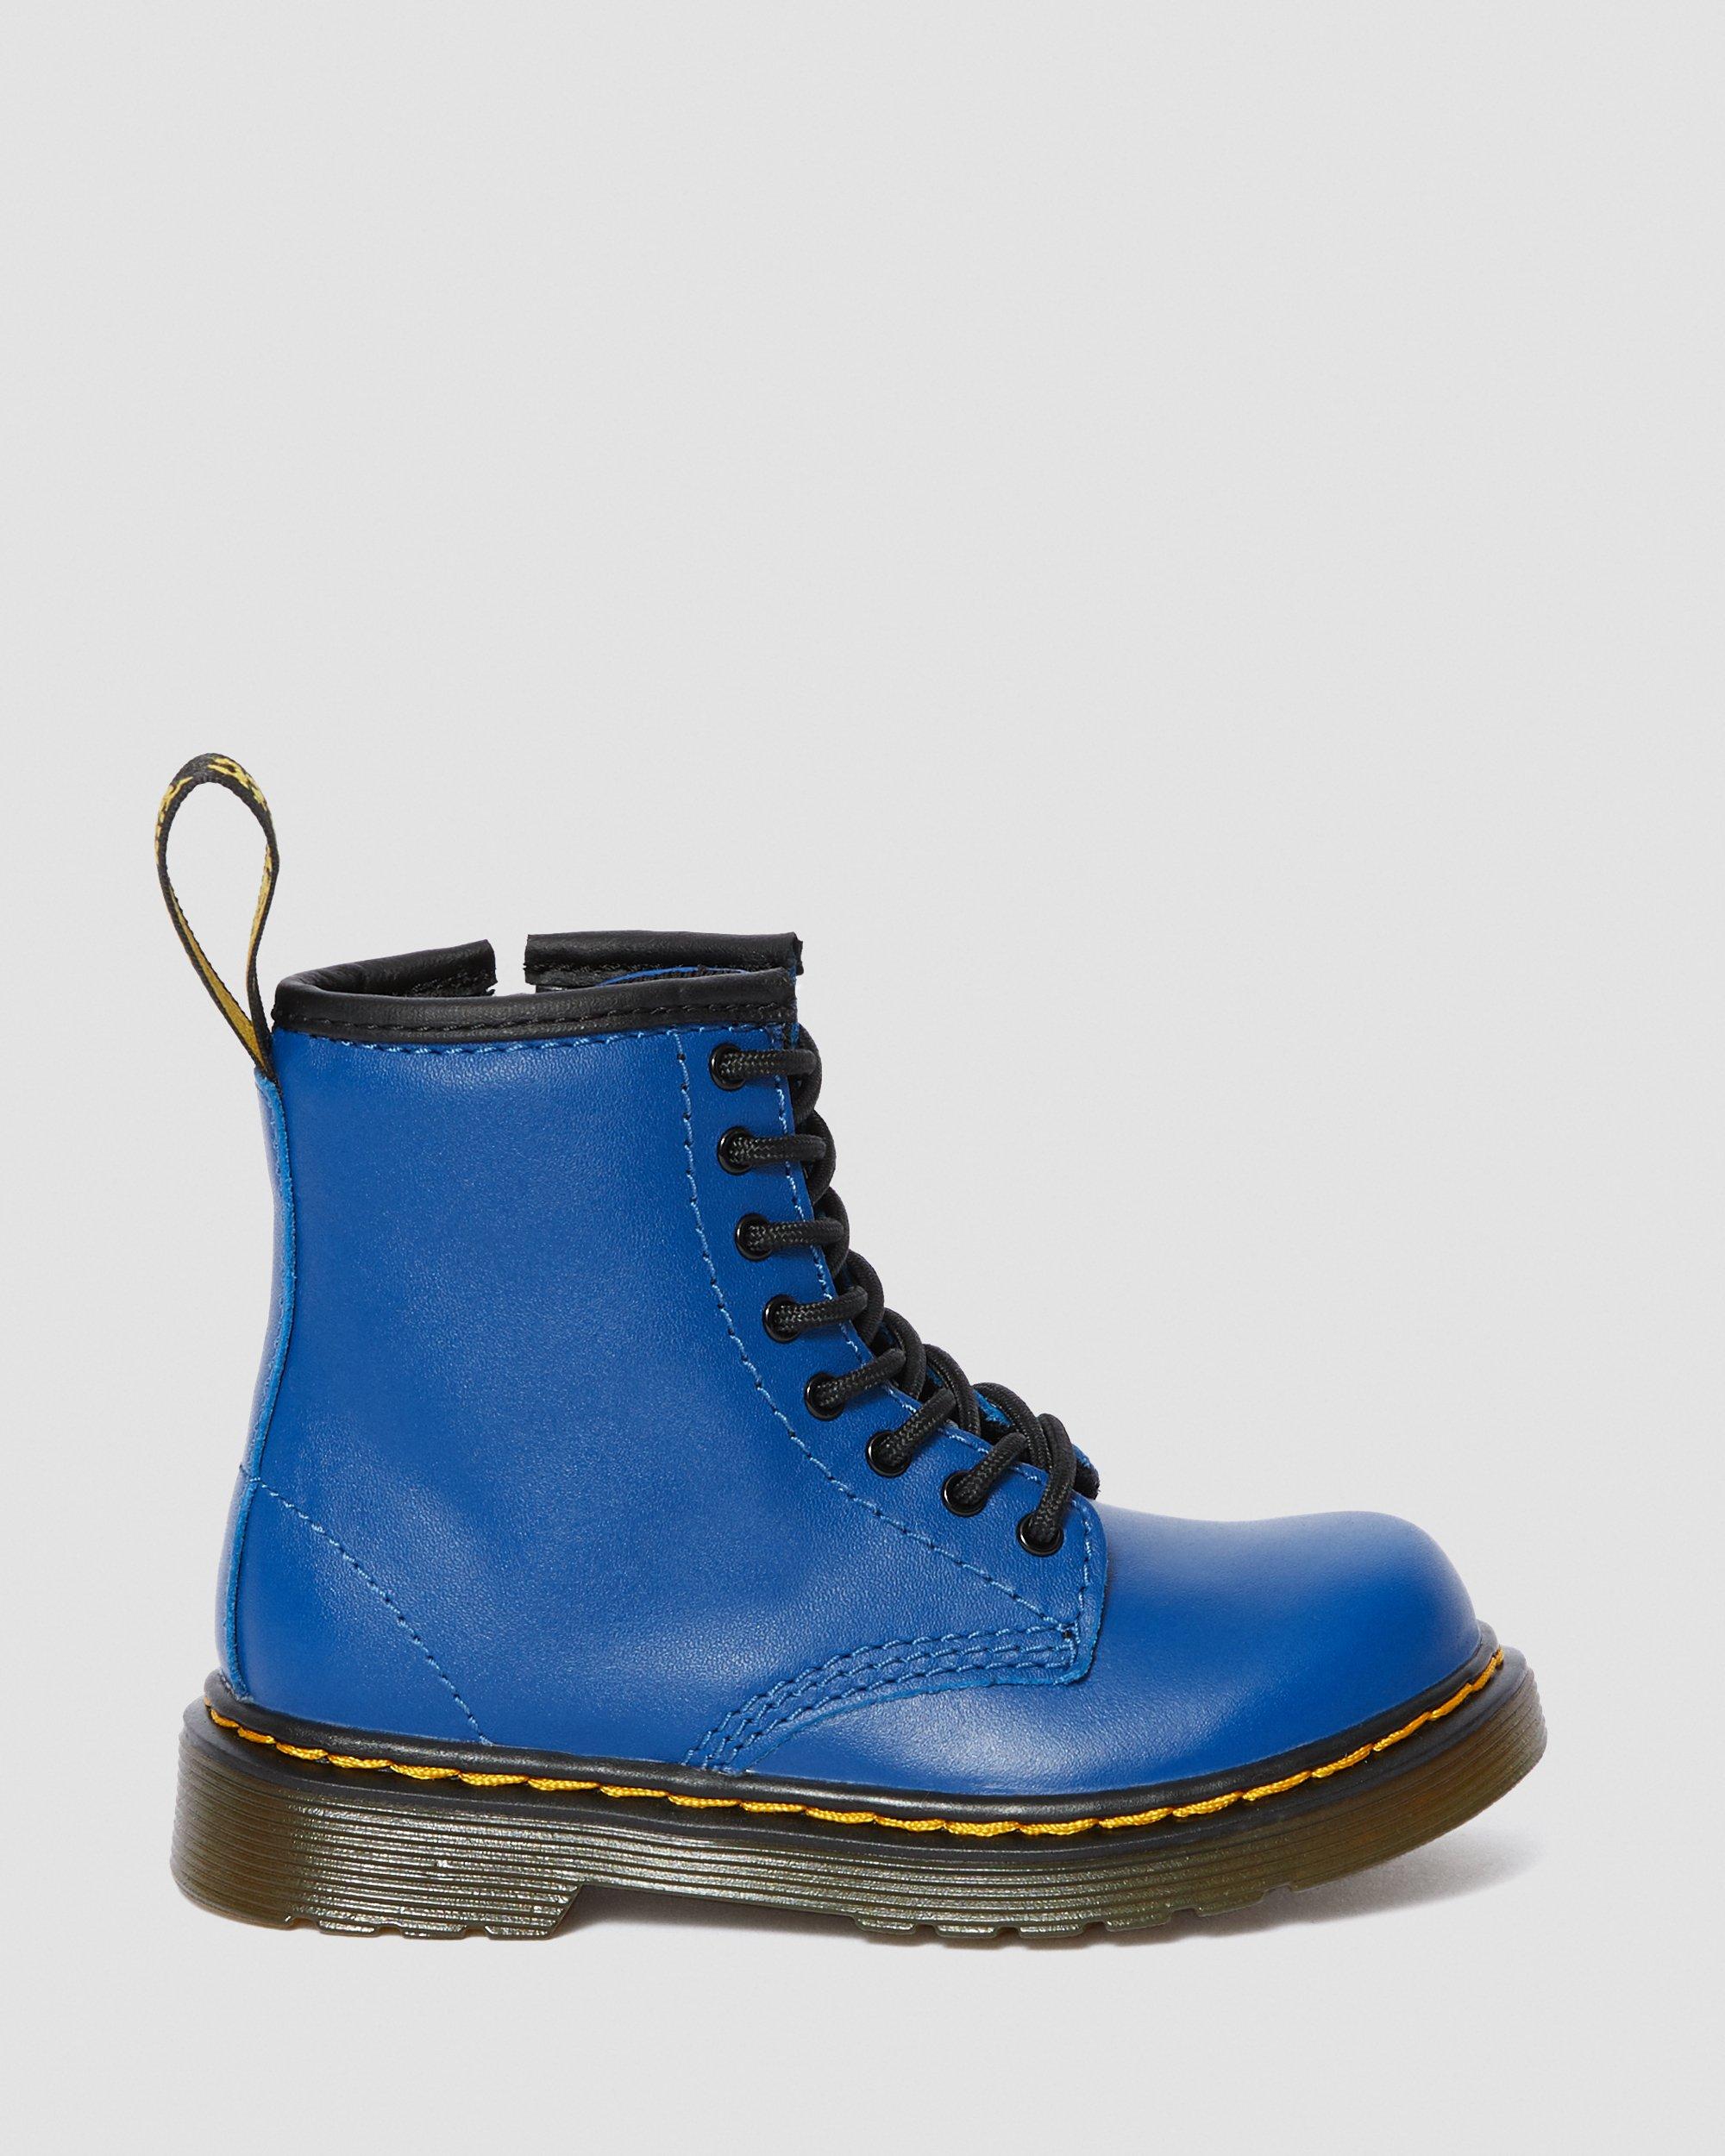 Toddler 1460 Leather Lace Up Boots in Blue